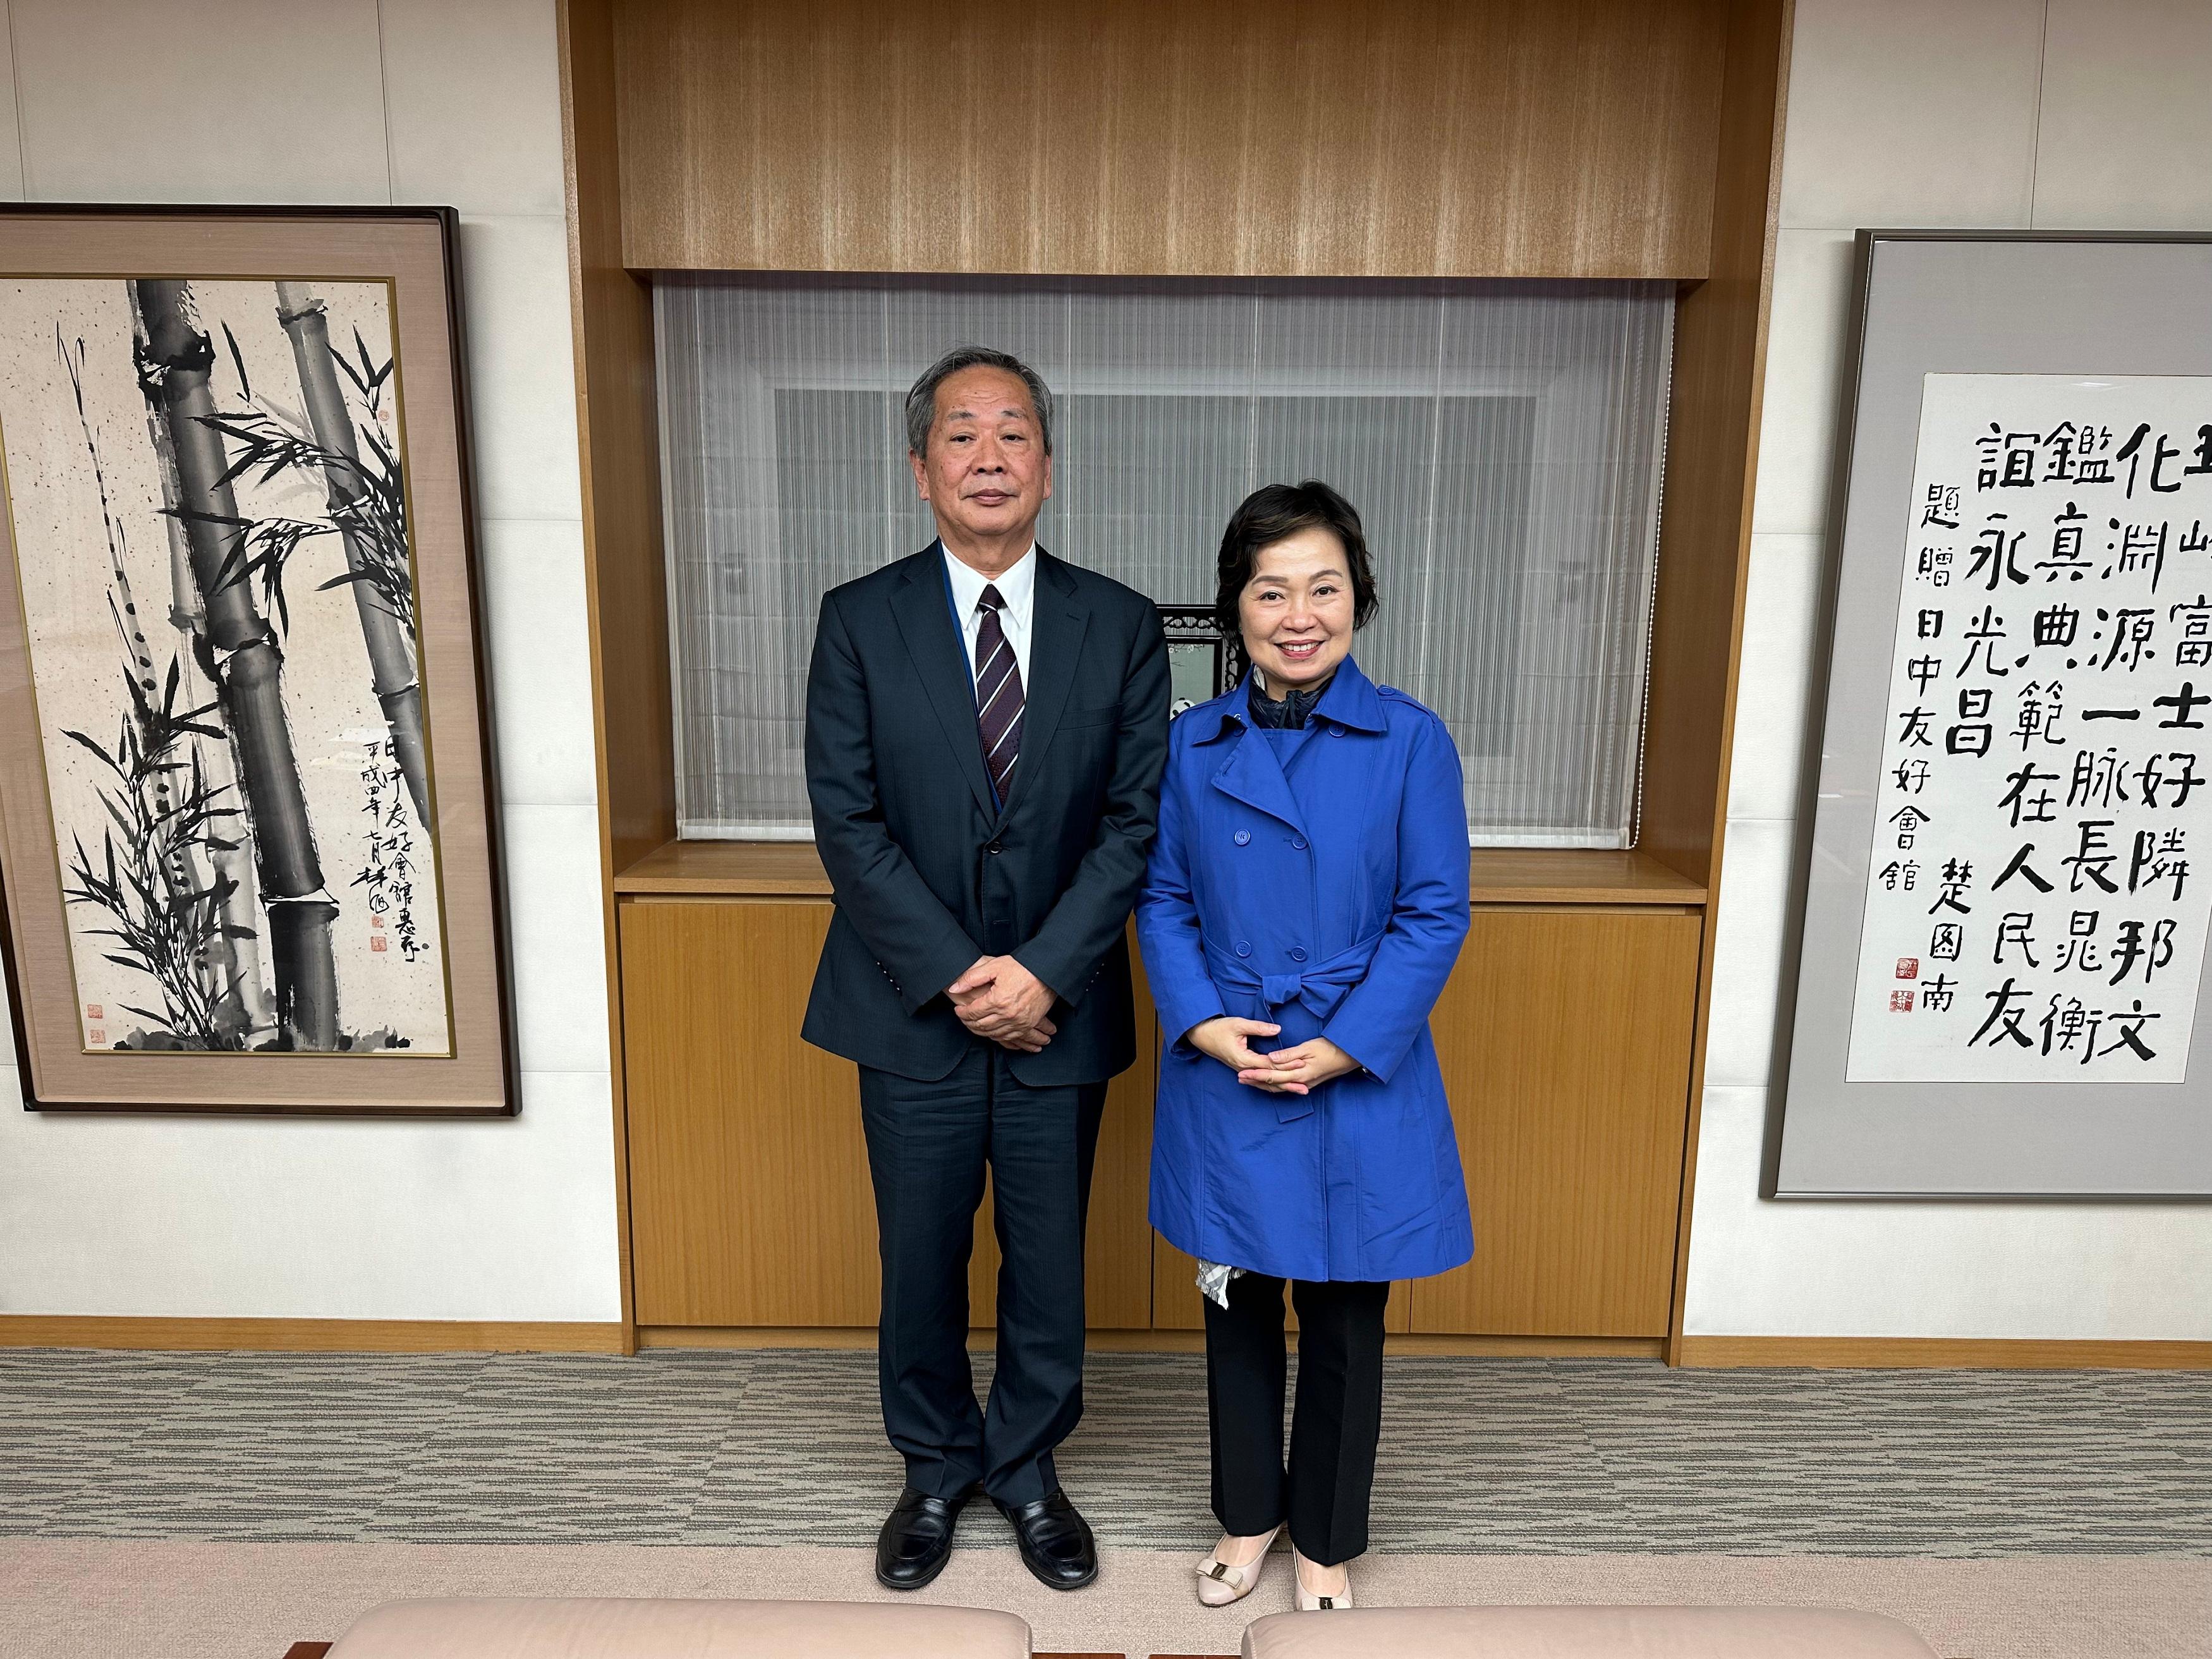 The Secretary for Education, Dr Choi Yuk-lin (right), paid a courtesy call on the President and Board Chairperson of the Japan-China Friendship Center, Mr Masashi Ogawa, in Tokyo yesterday (December 5).